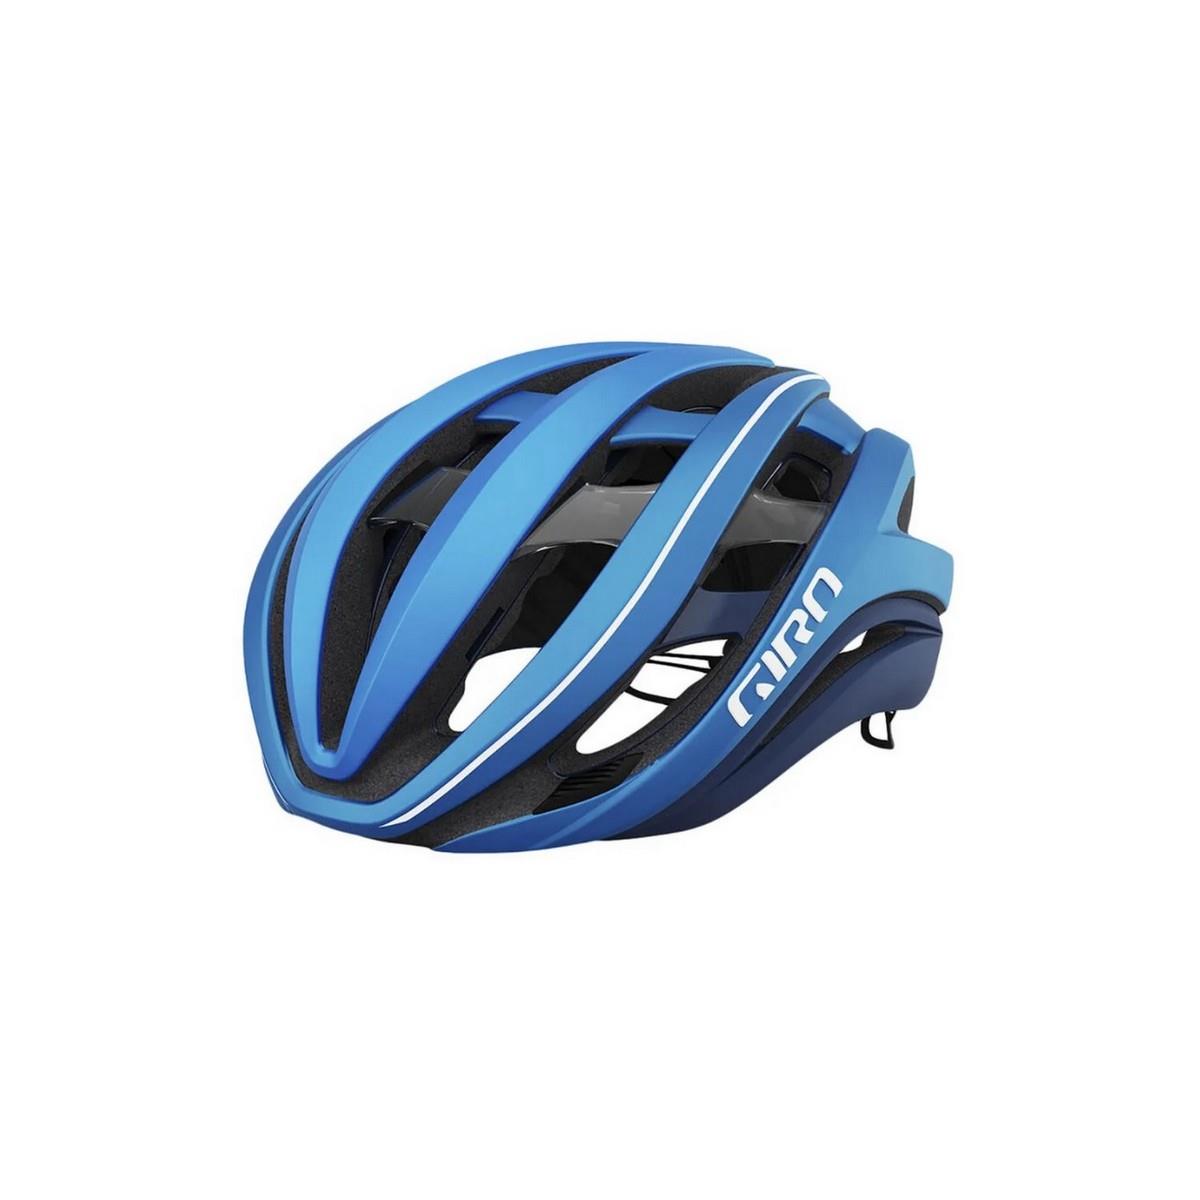 Casque Aether Spherical MIPS Bleu Taille L (59-63cm)